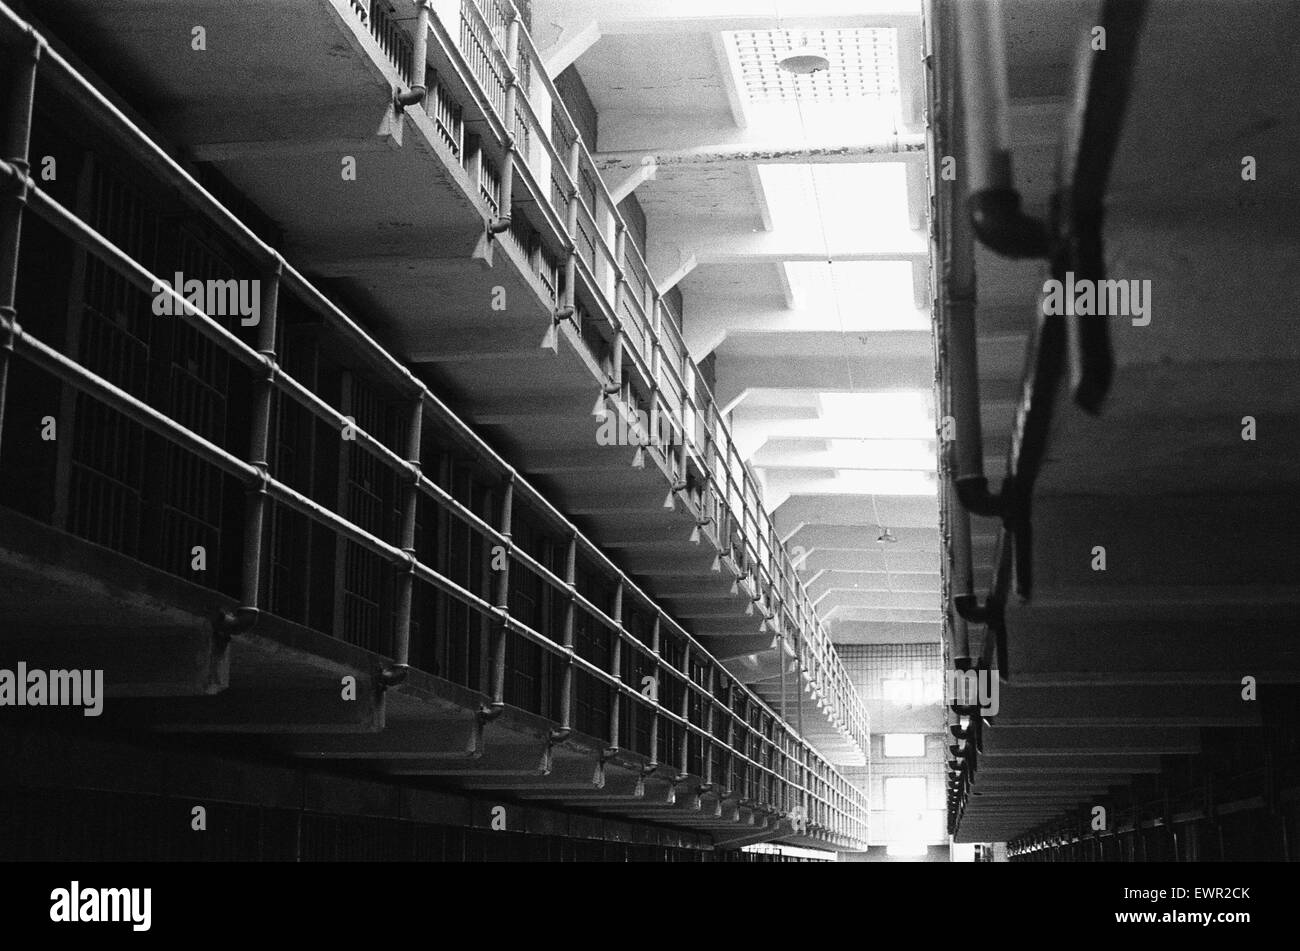 Interior of a cell block in Alcatraz prison, San Francisco Bay. September 1979 The prison was originally built by the US Army in 1910 and handed over to the United States Department of Justice on October 12, 1933 as a high security prison. Given the locat Stock Photo